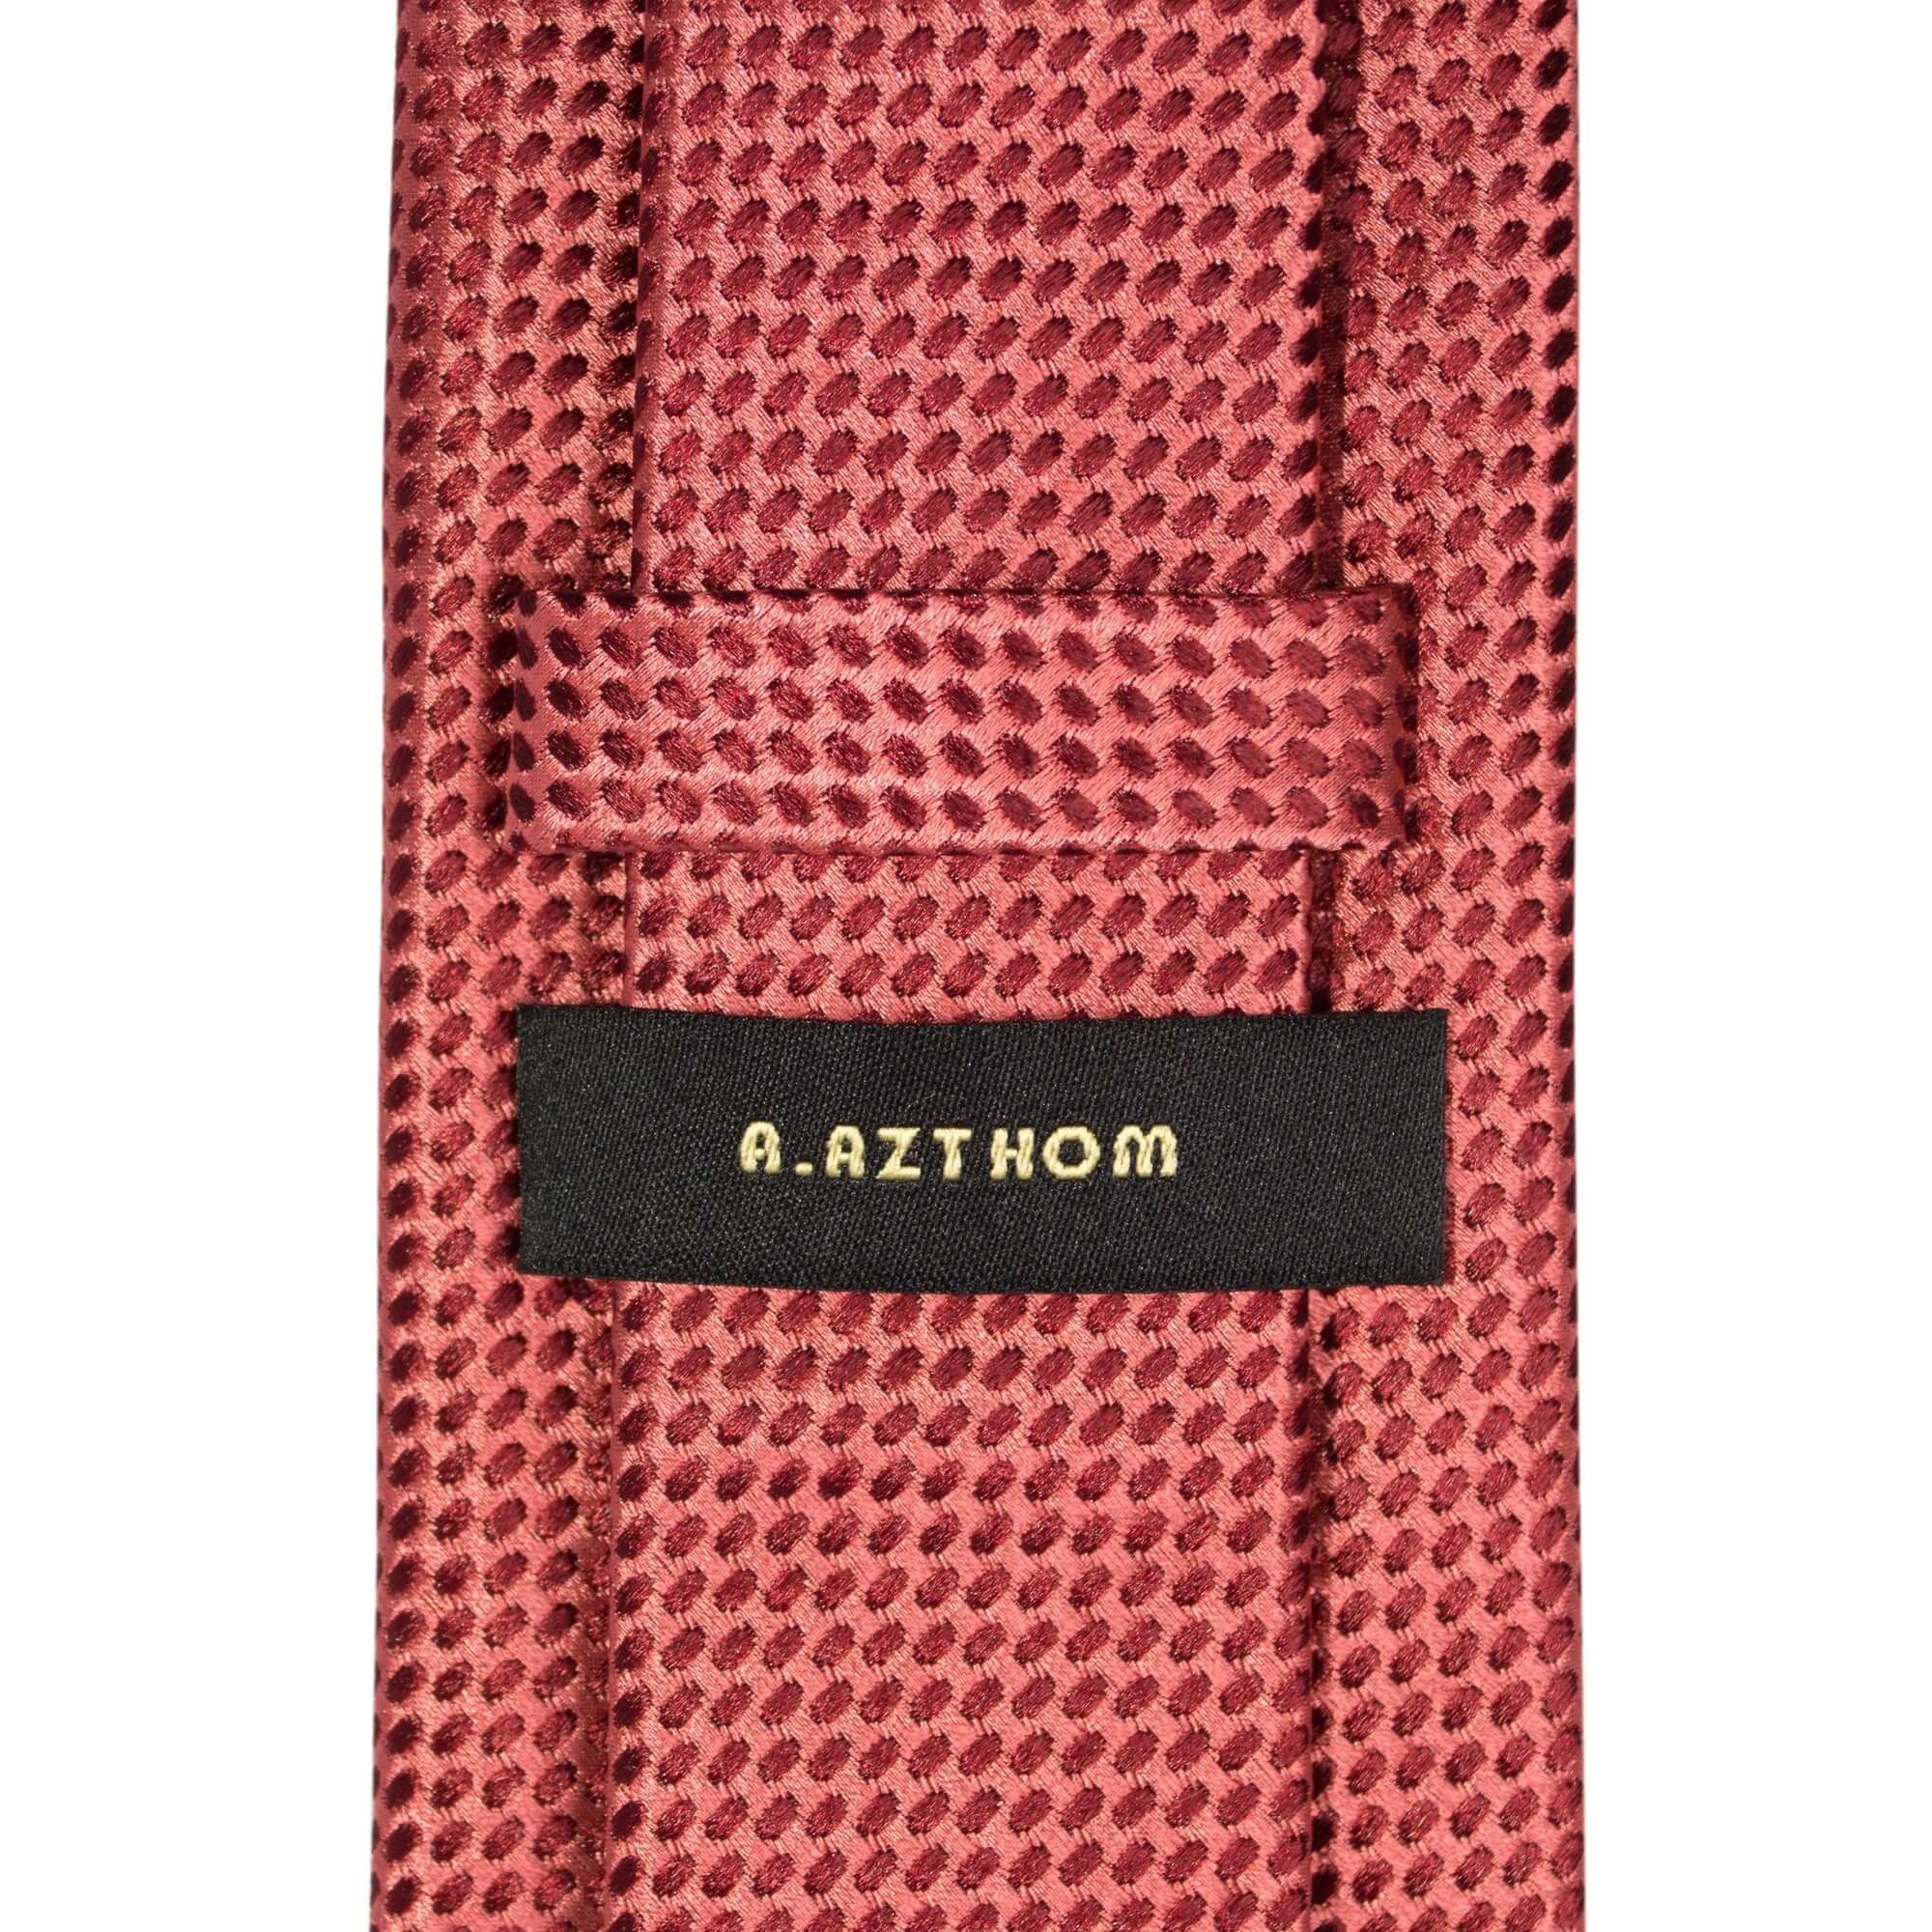 8cm Coral Silk Woven Tie with Red Dots Detail-Cufflinks.com.sg | Neckties.com.sg